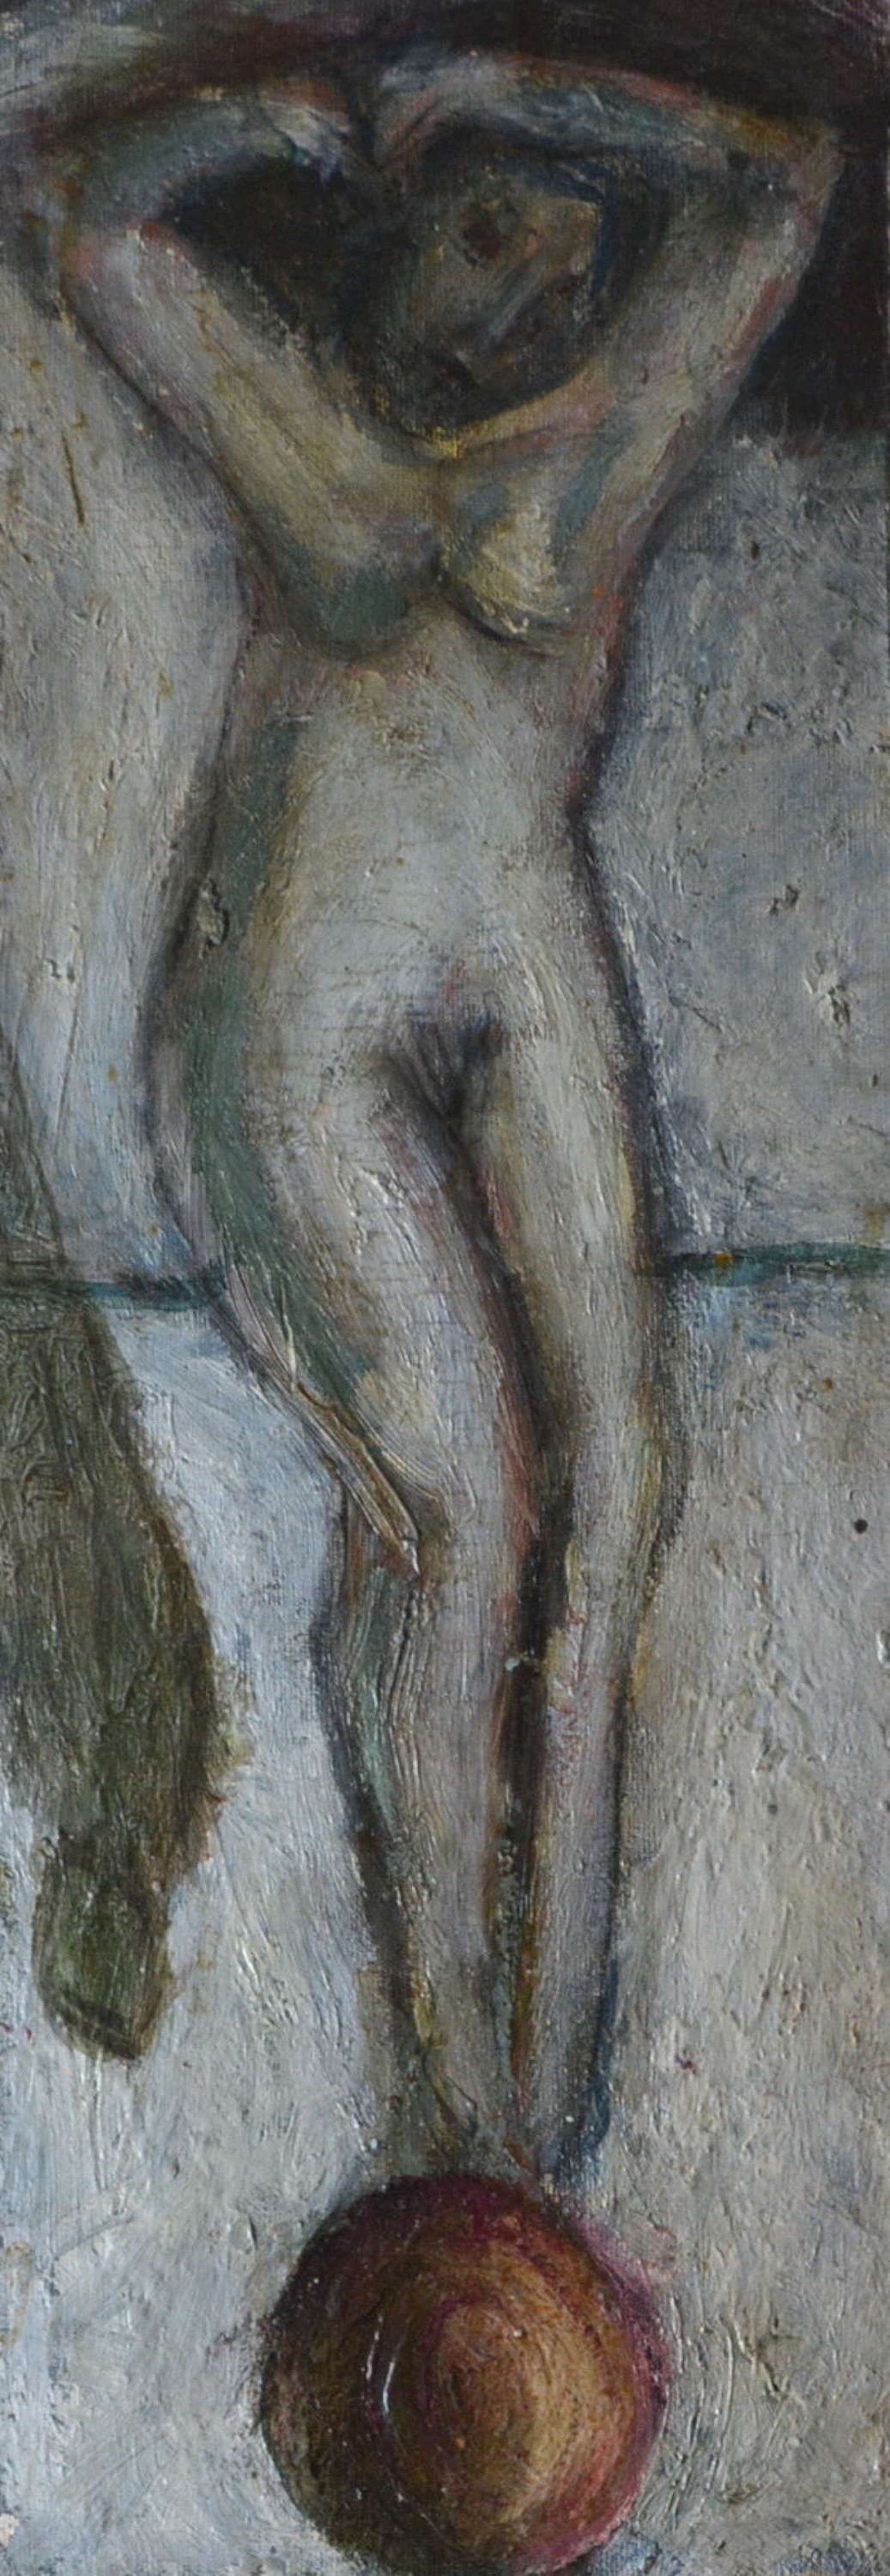 ABSTRACT FIGURATIVE STUDY